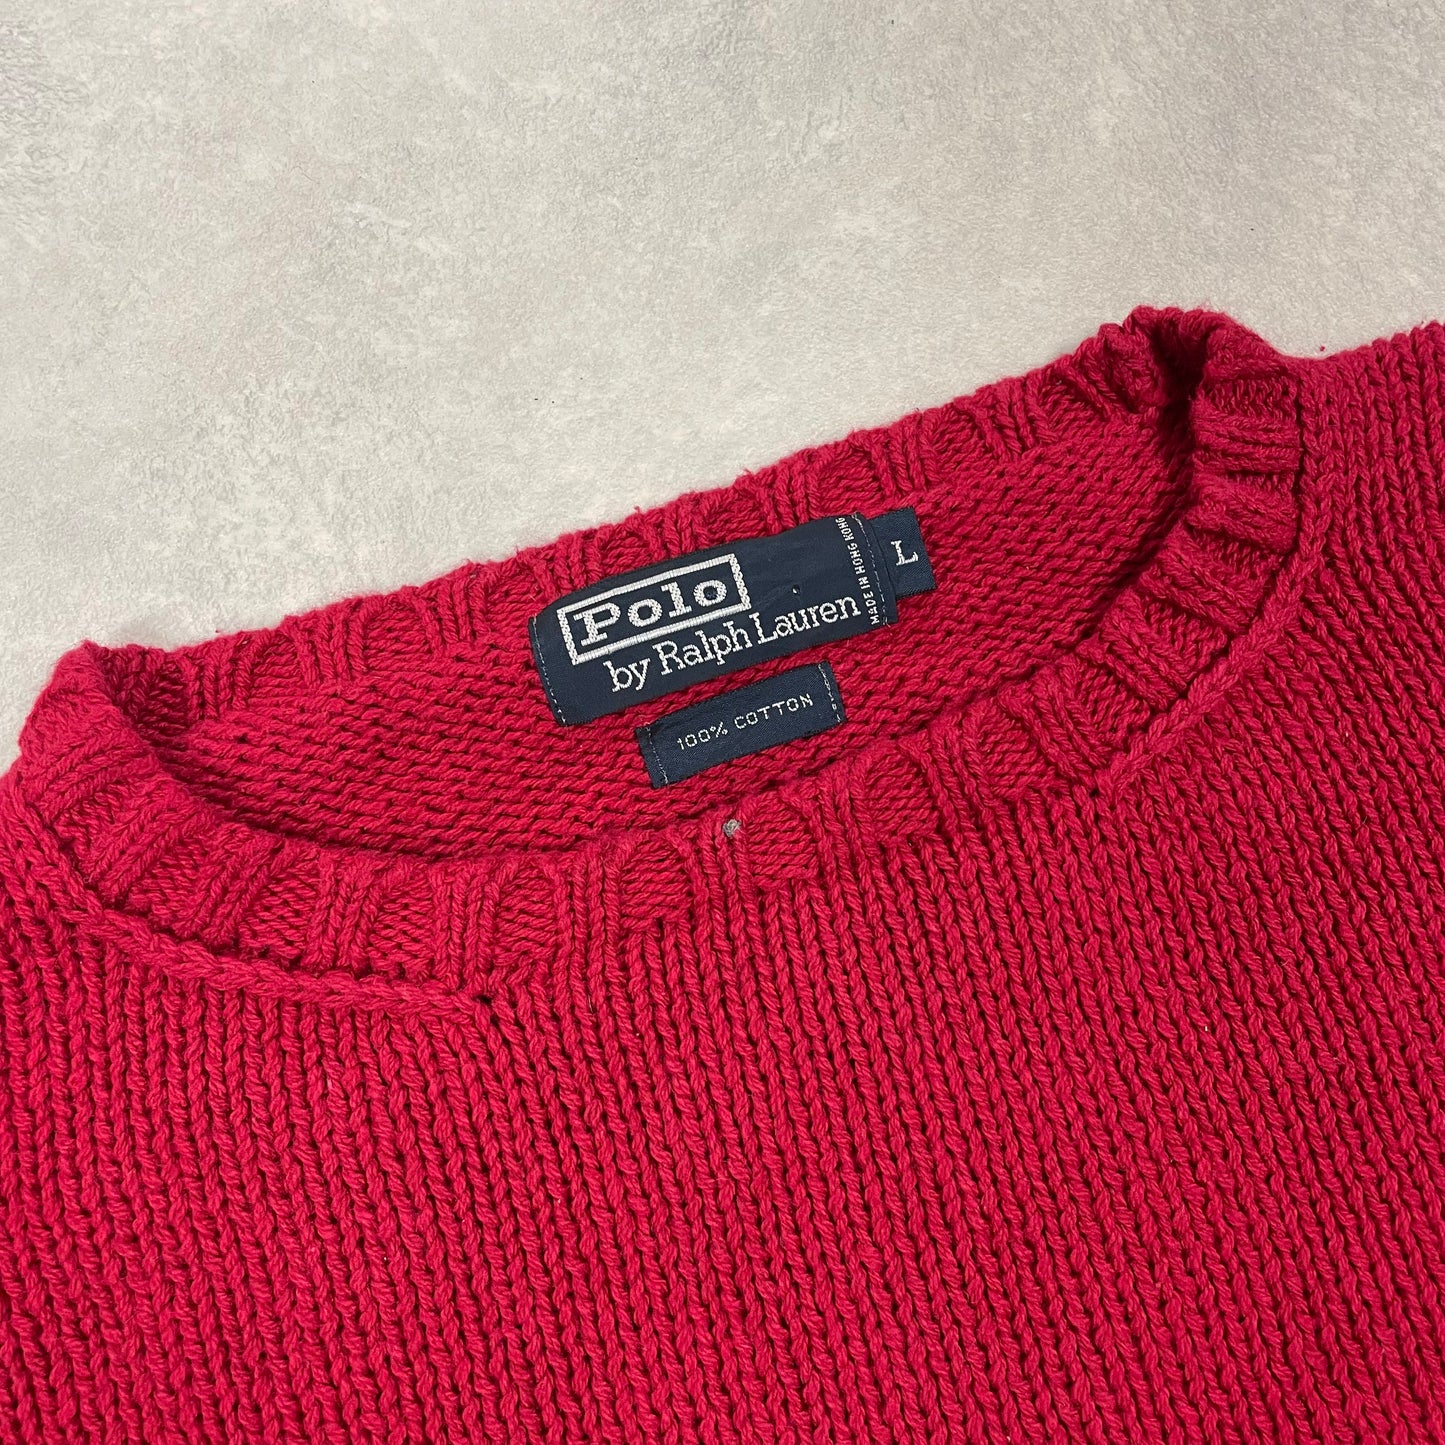 Vintage Polo Ralph Lauren Sweater Red Big Size